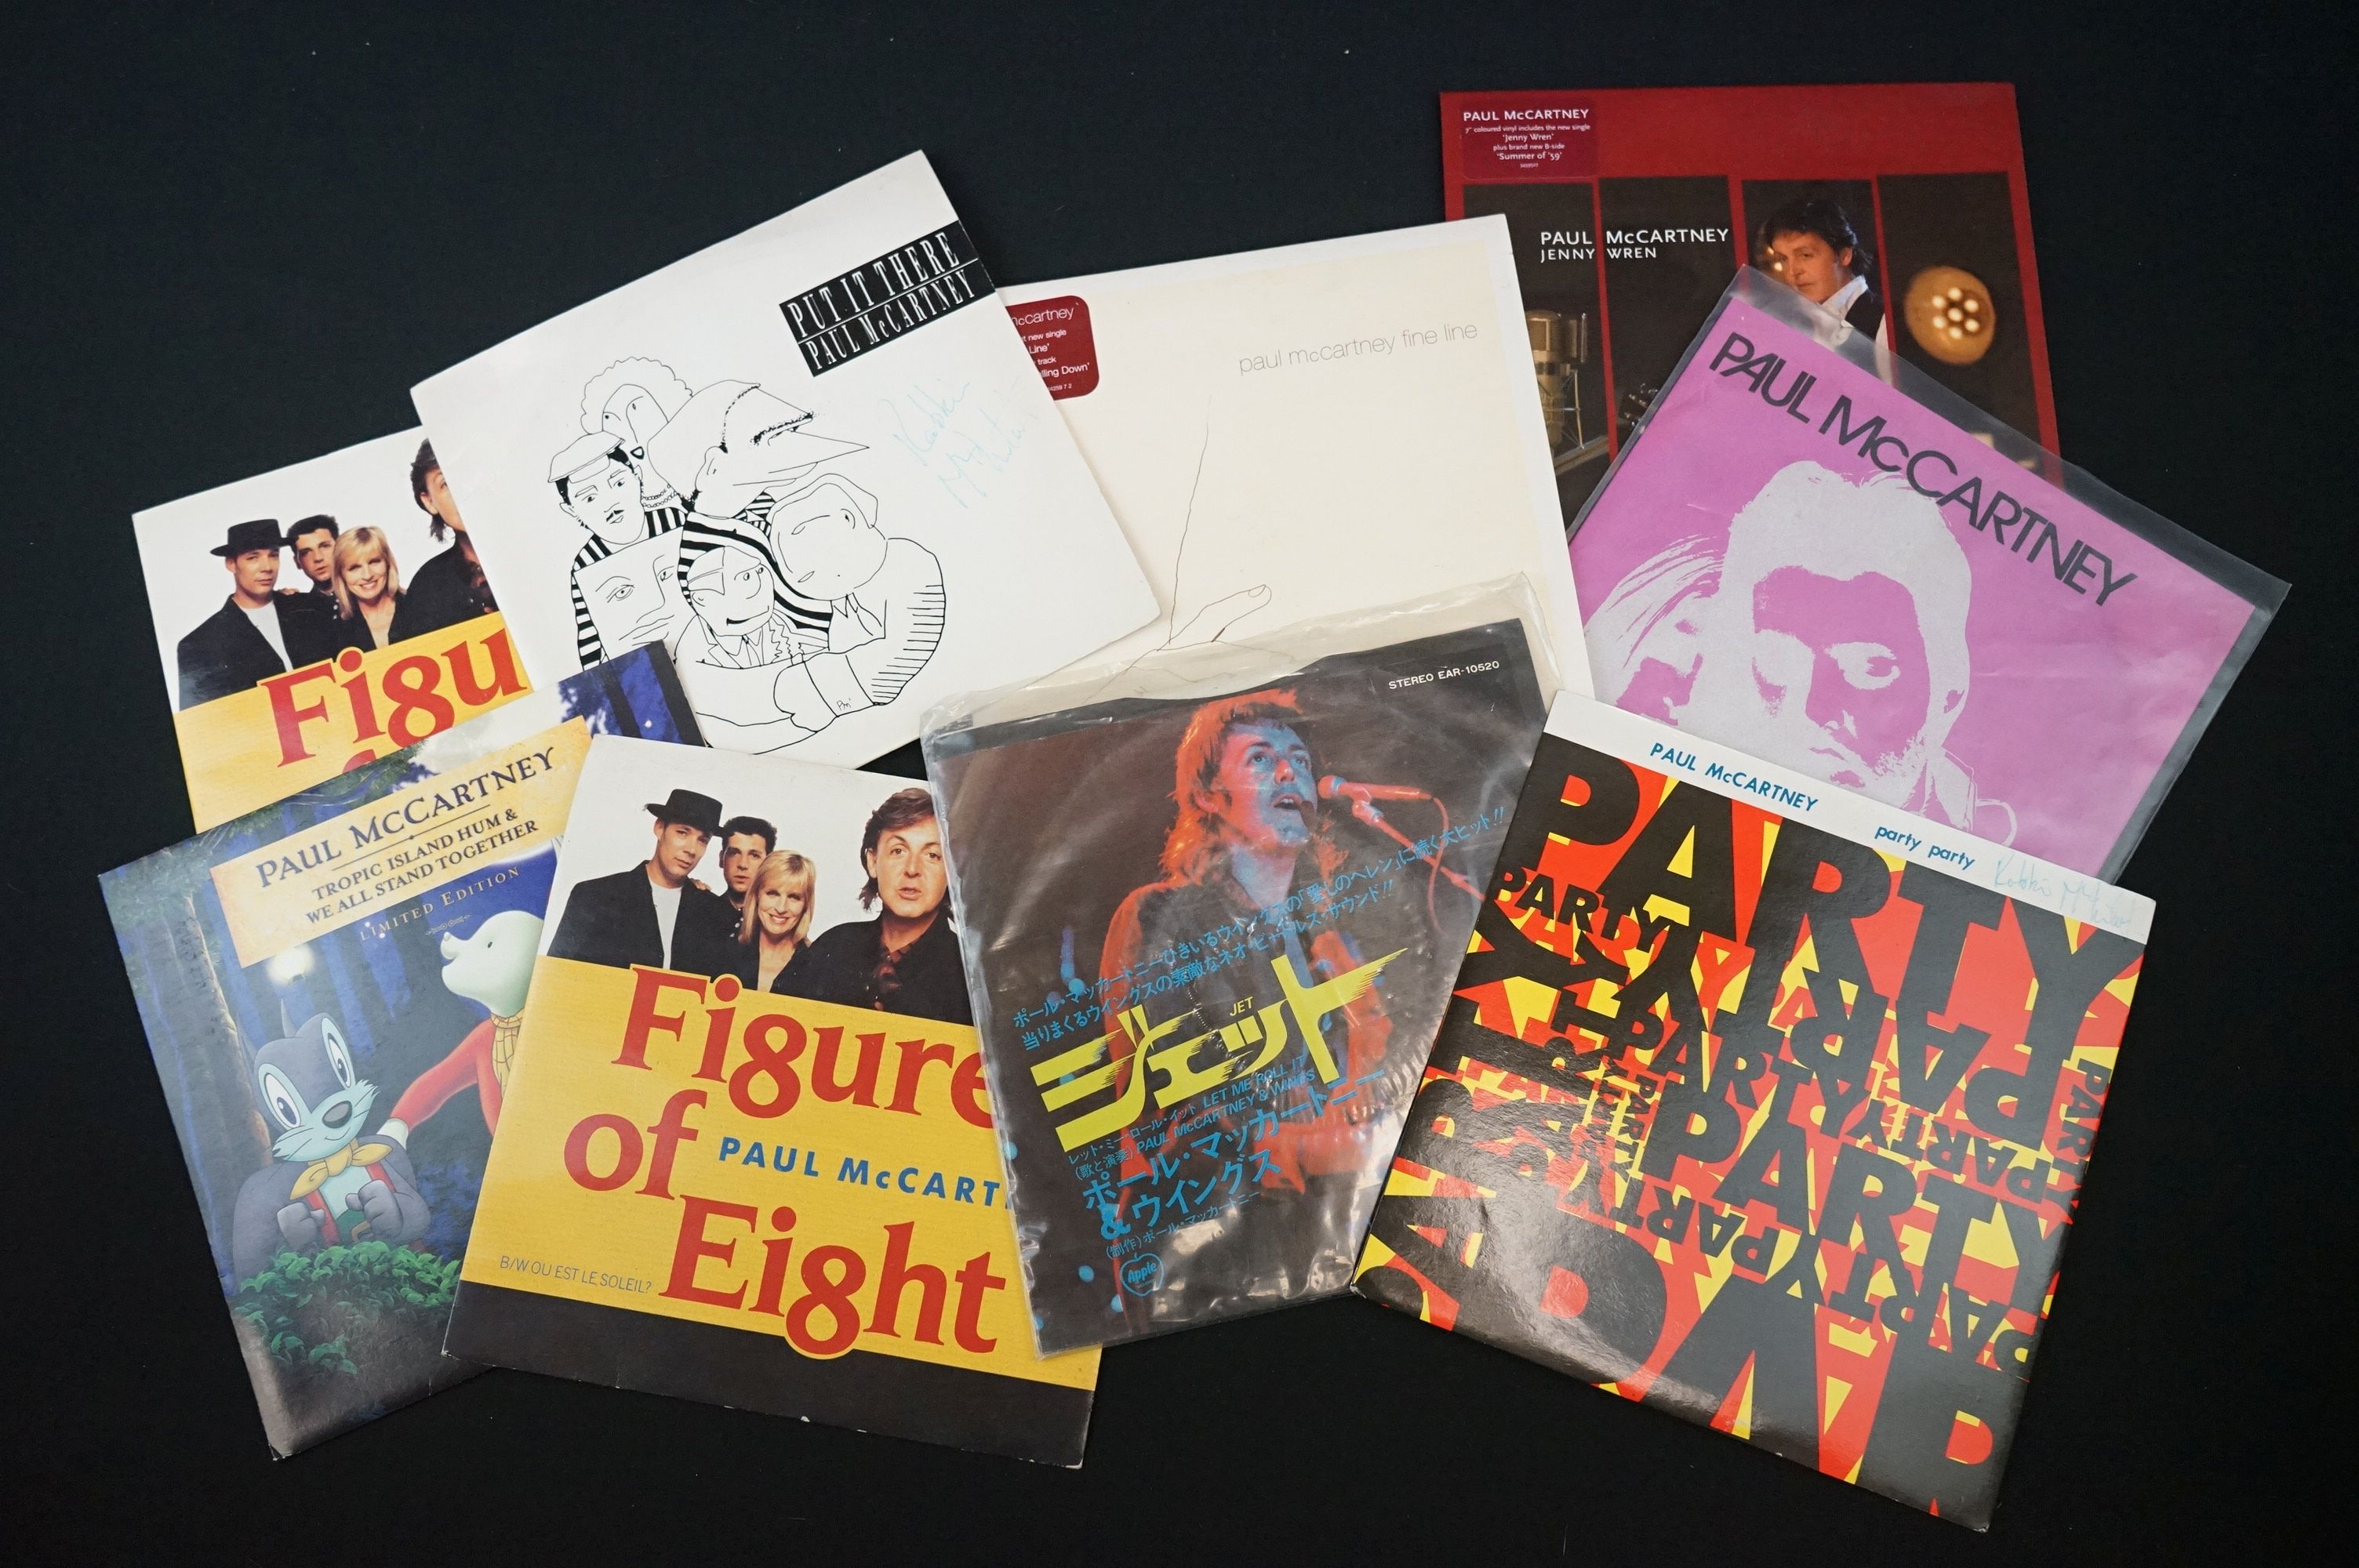 Vinyl & Autographs - Paul McCartney - over 30 singles including Rarities , Limited Editions, - Image 2 of 4